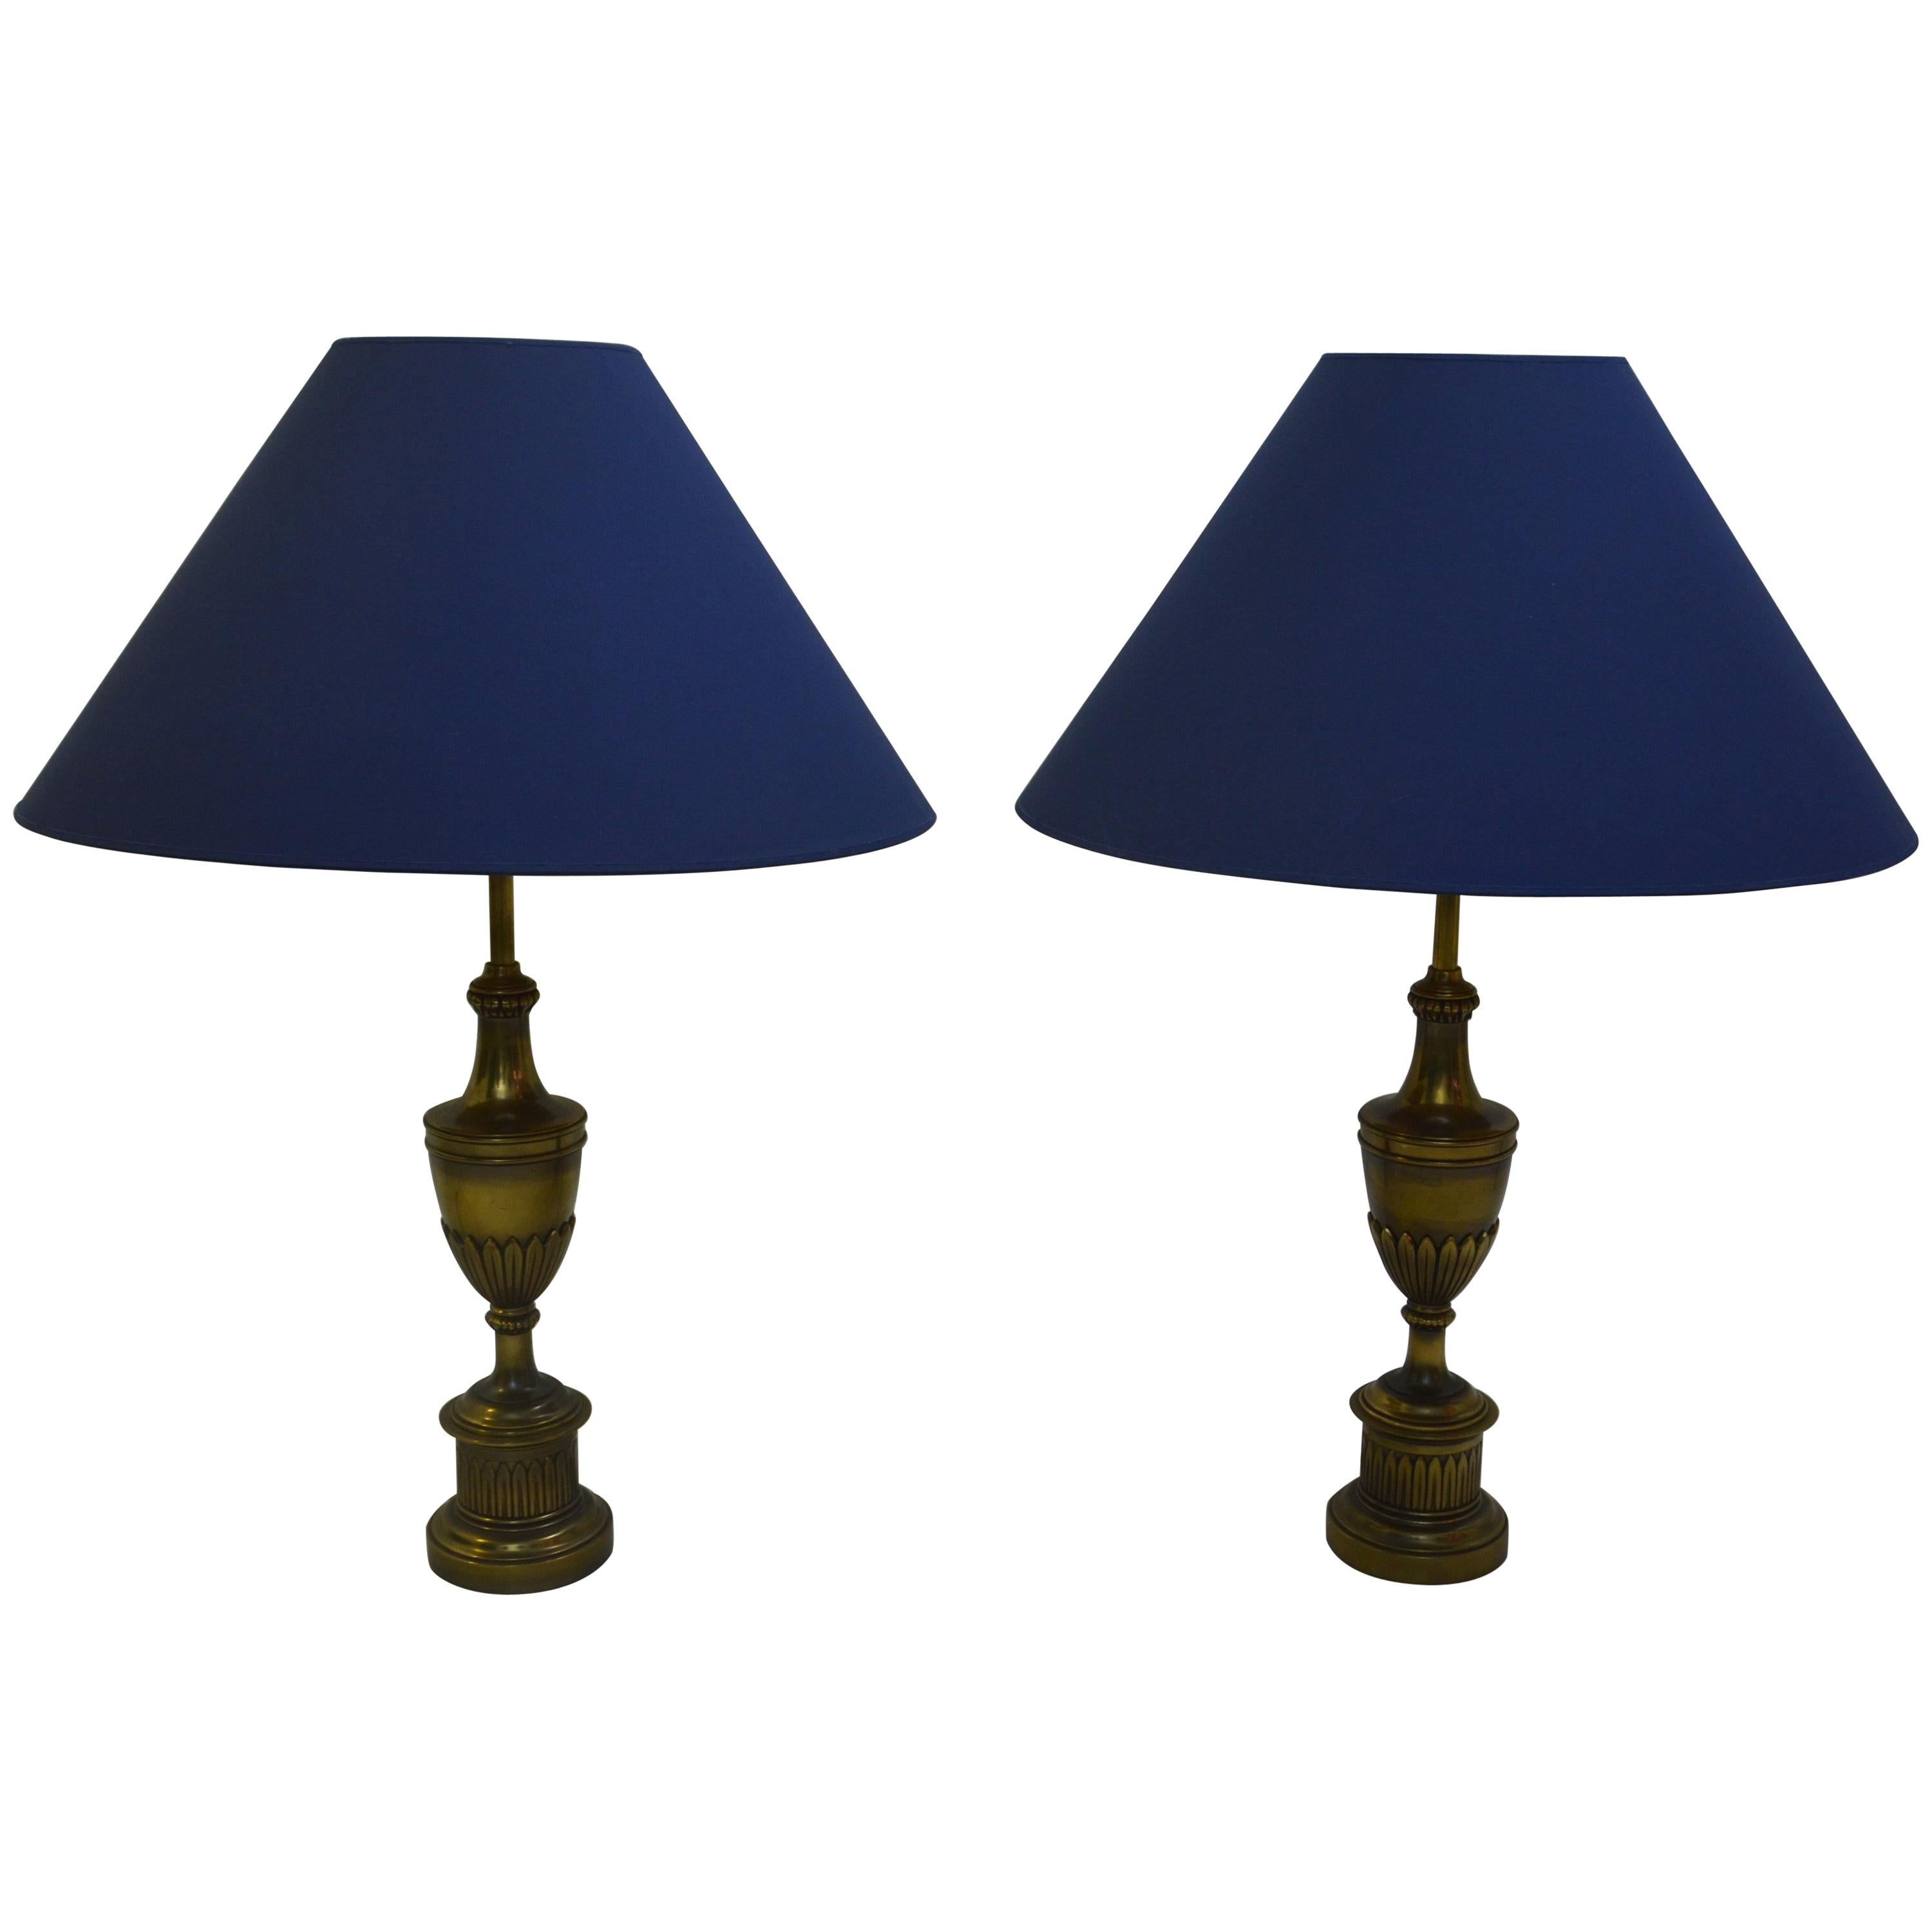 Pair of Brass Neoclassical Style Stiffel Table Lamps with Shades